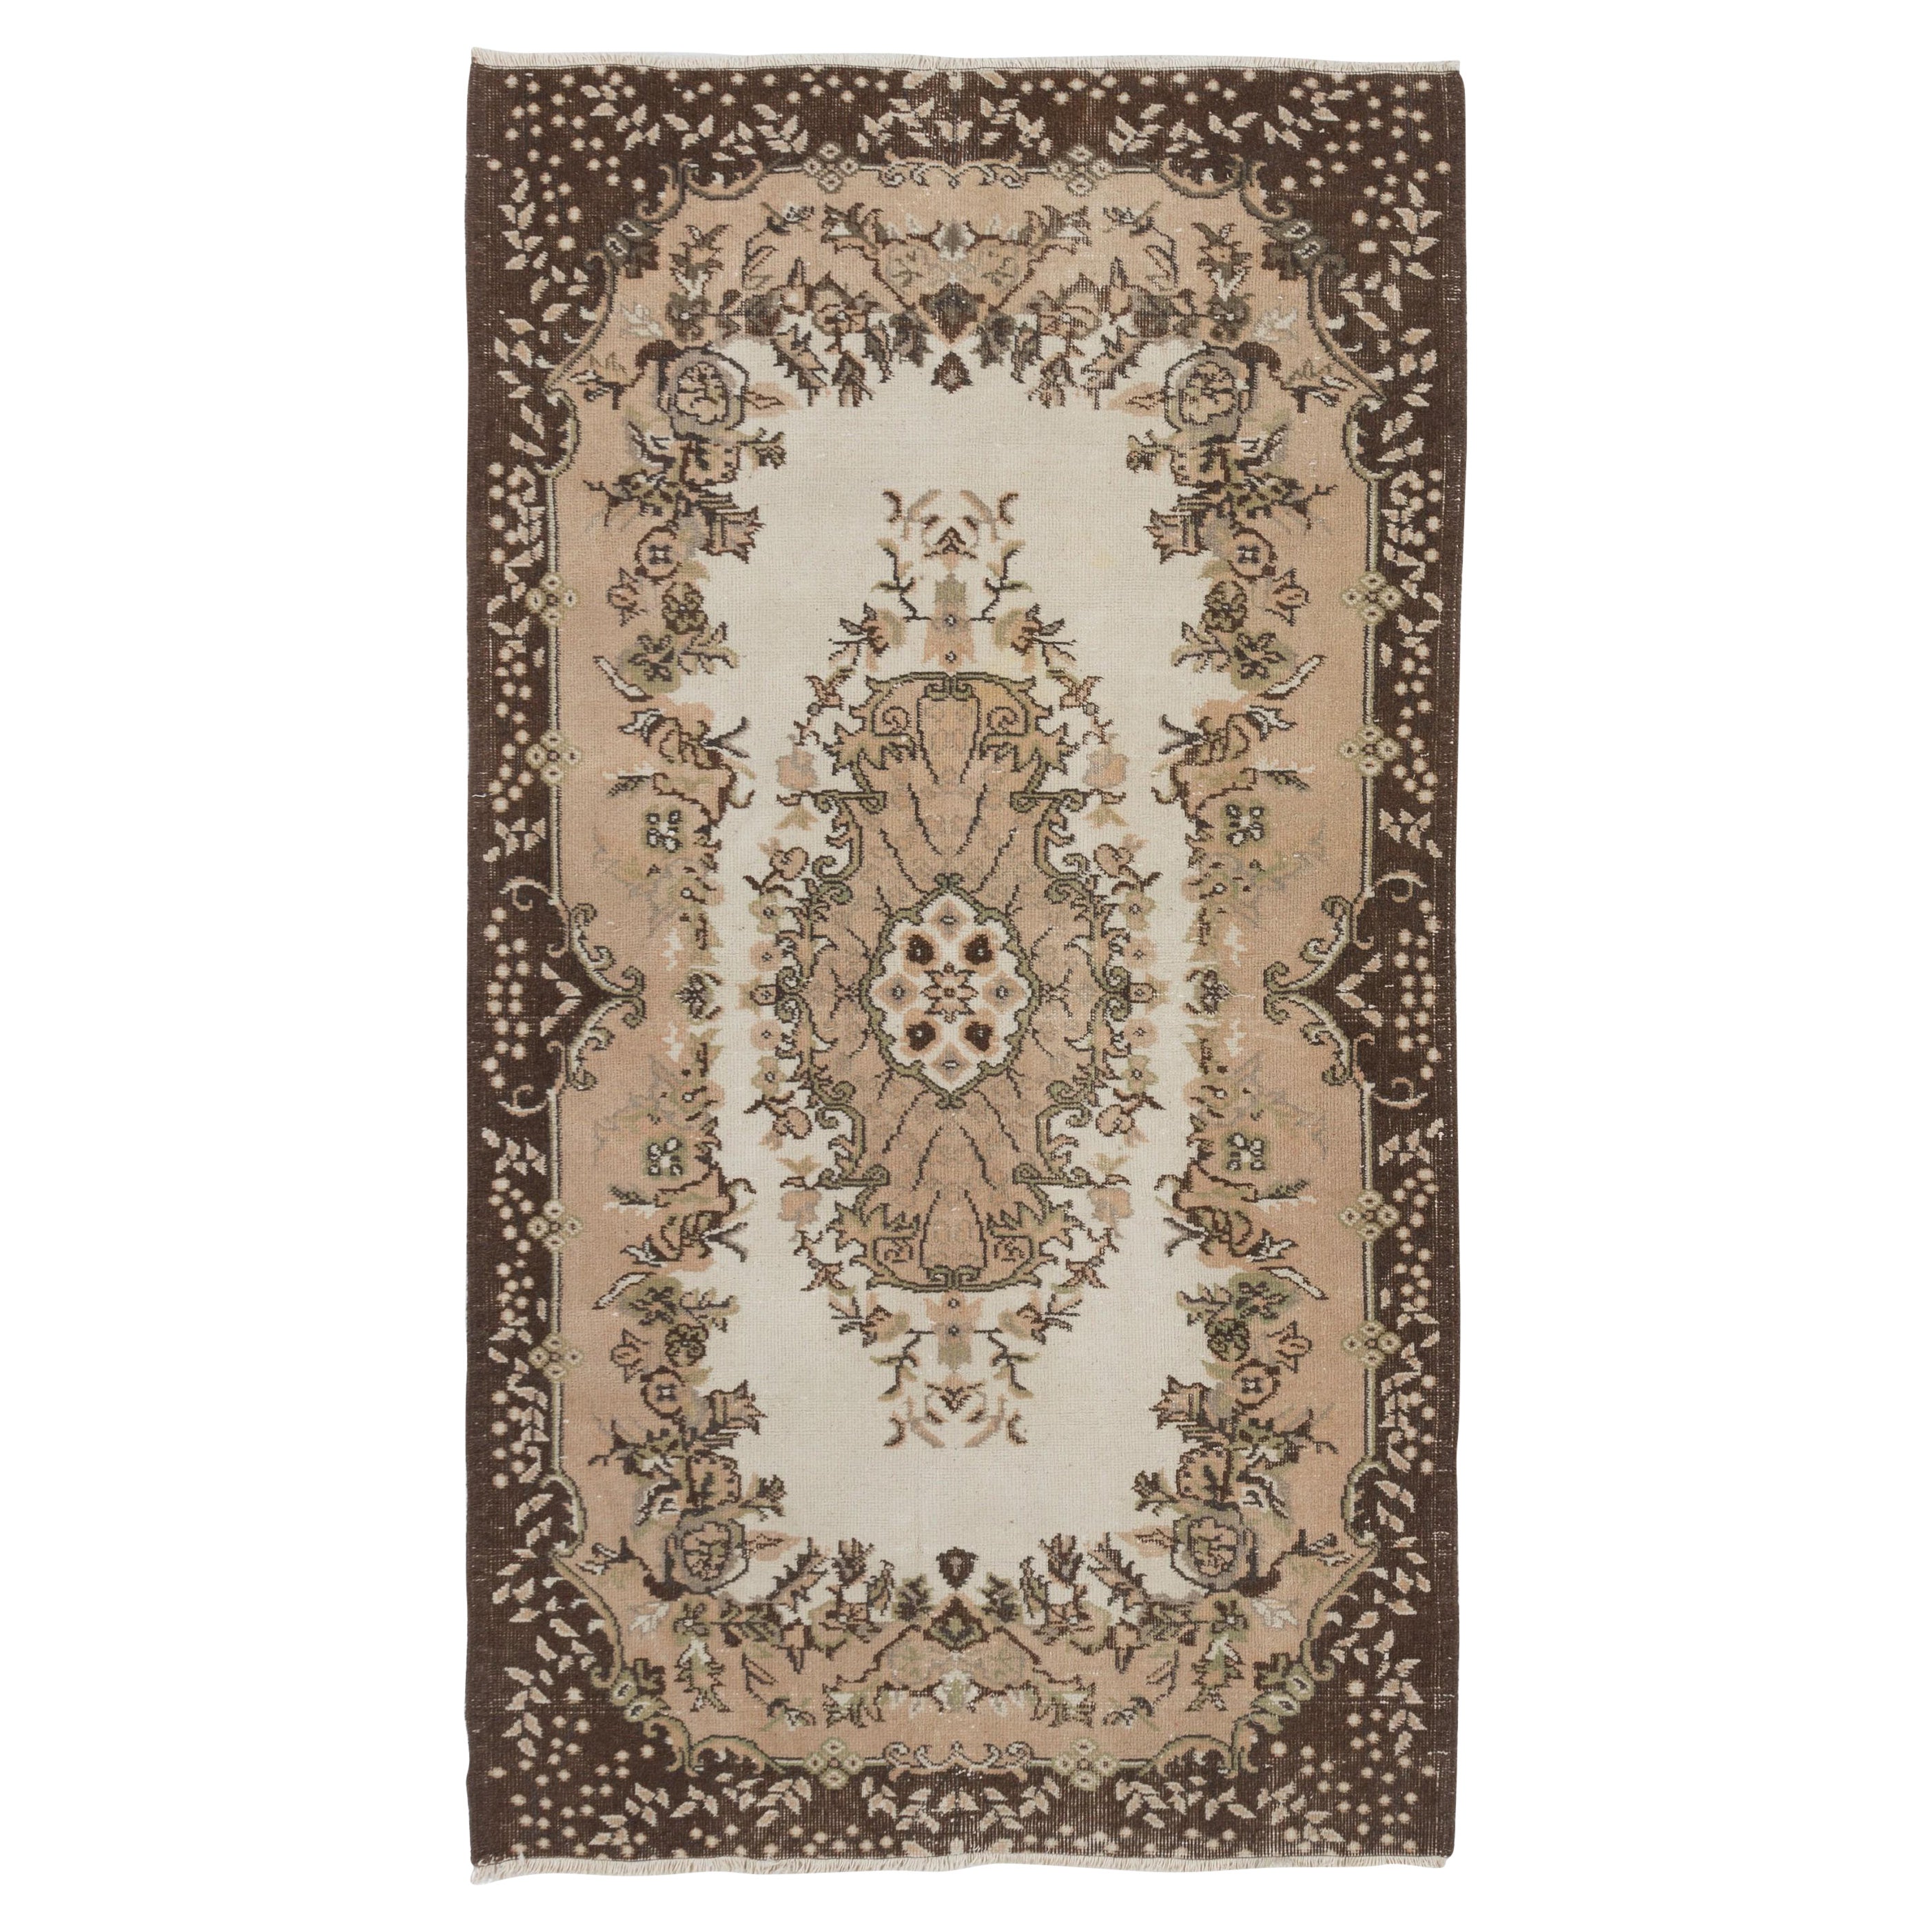 4x7 ft Vintage Hand-Knotted Turkish Accent Rug with Floral Medallion Design